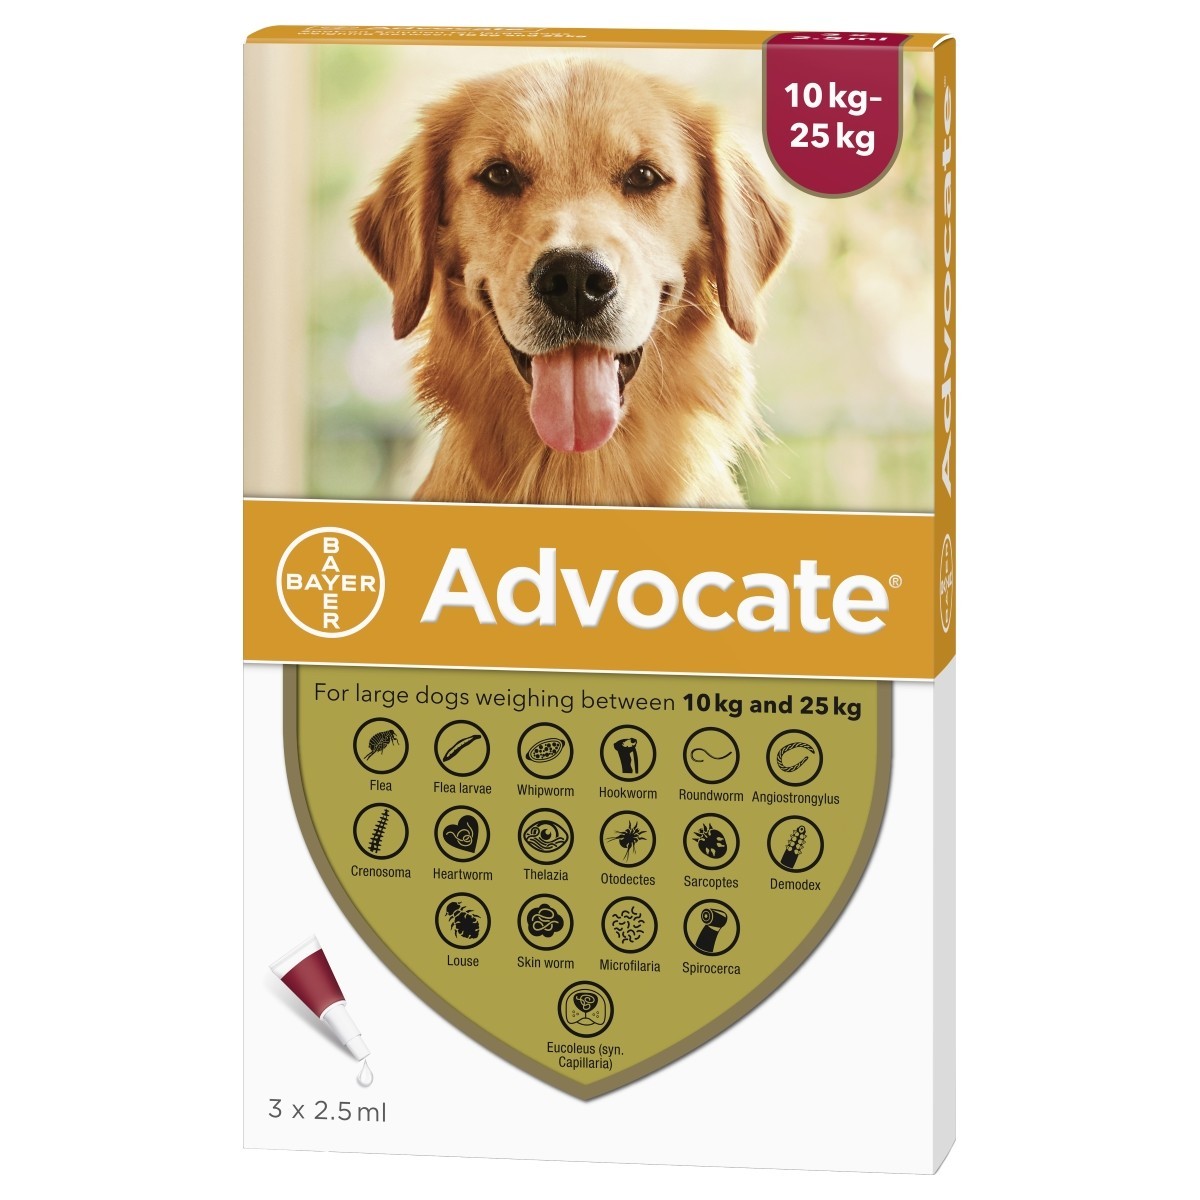 Advocate for Large Dogs - From £17.12